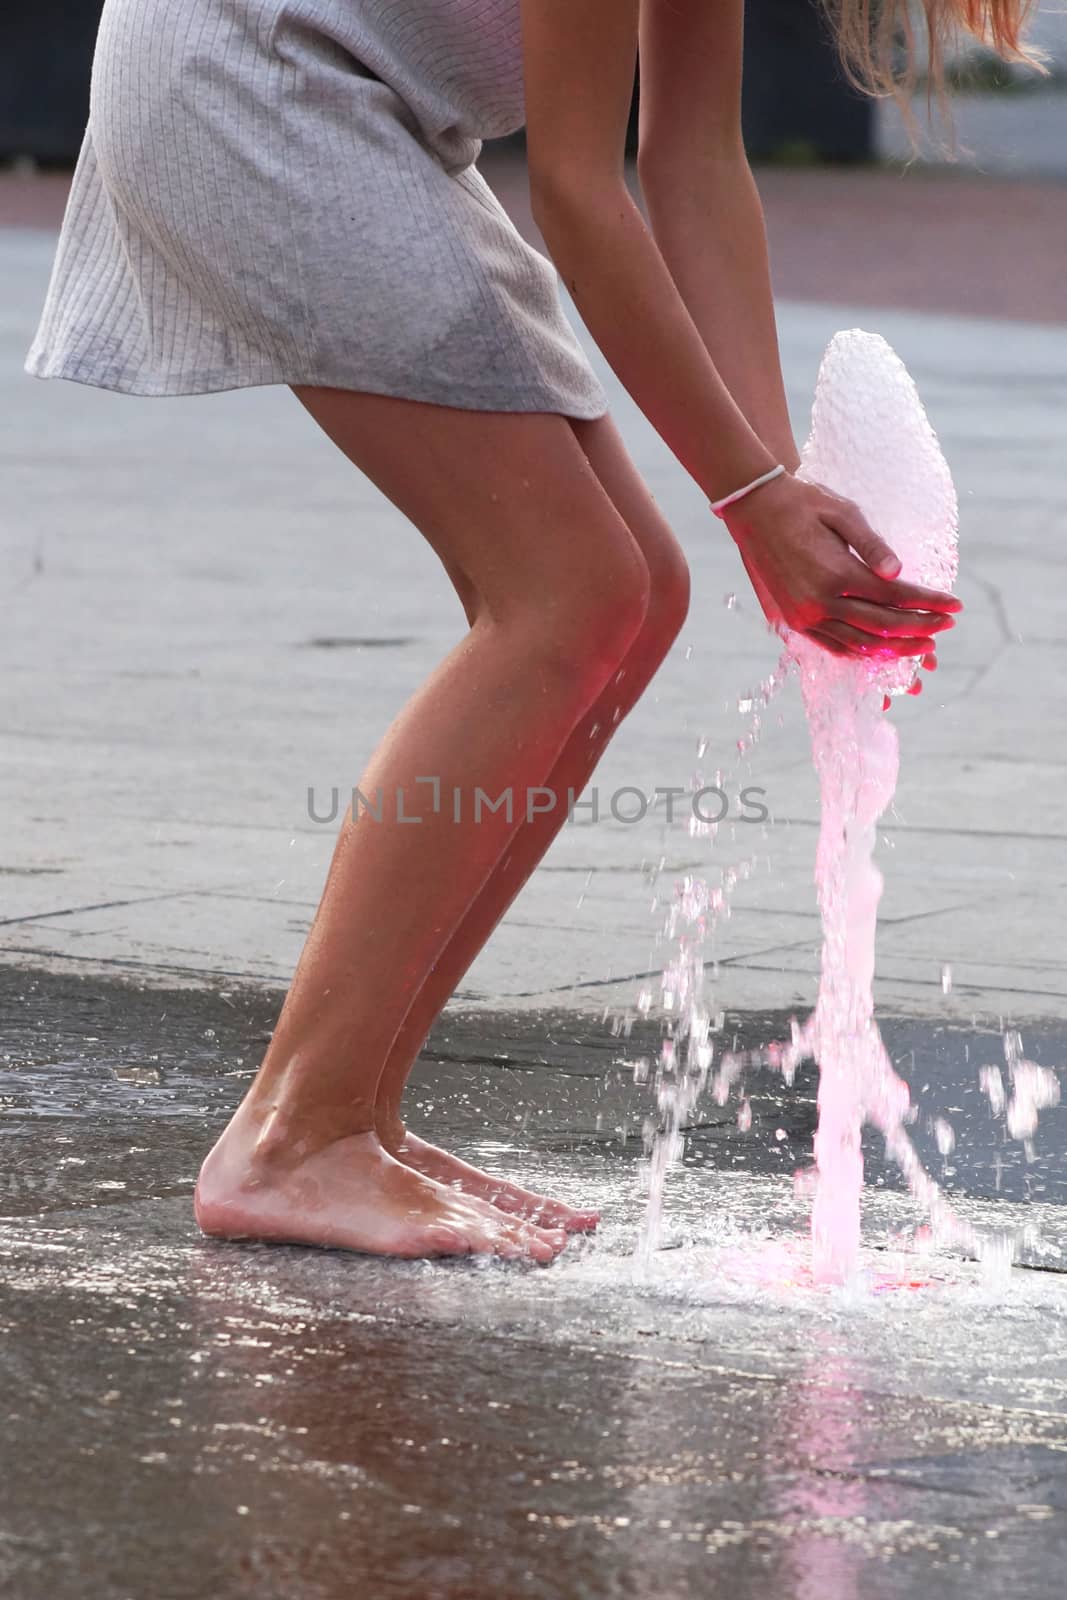 barefoot girl touching the fountain on the sidewalk